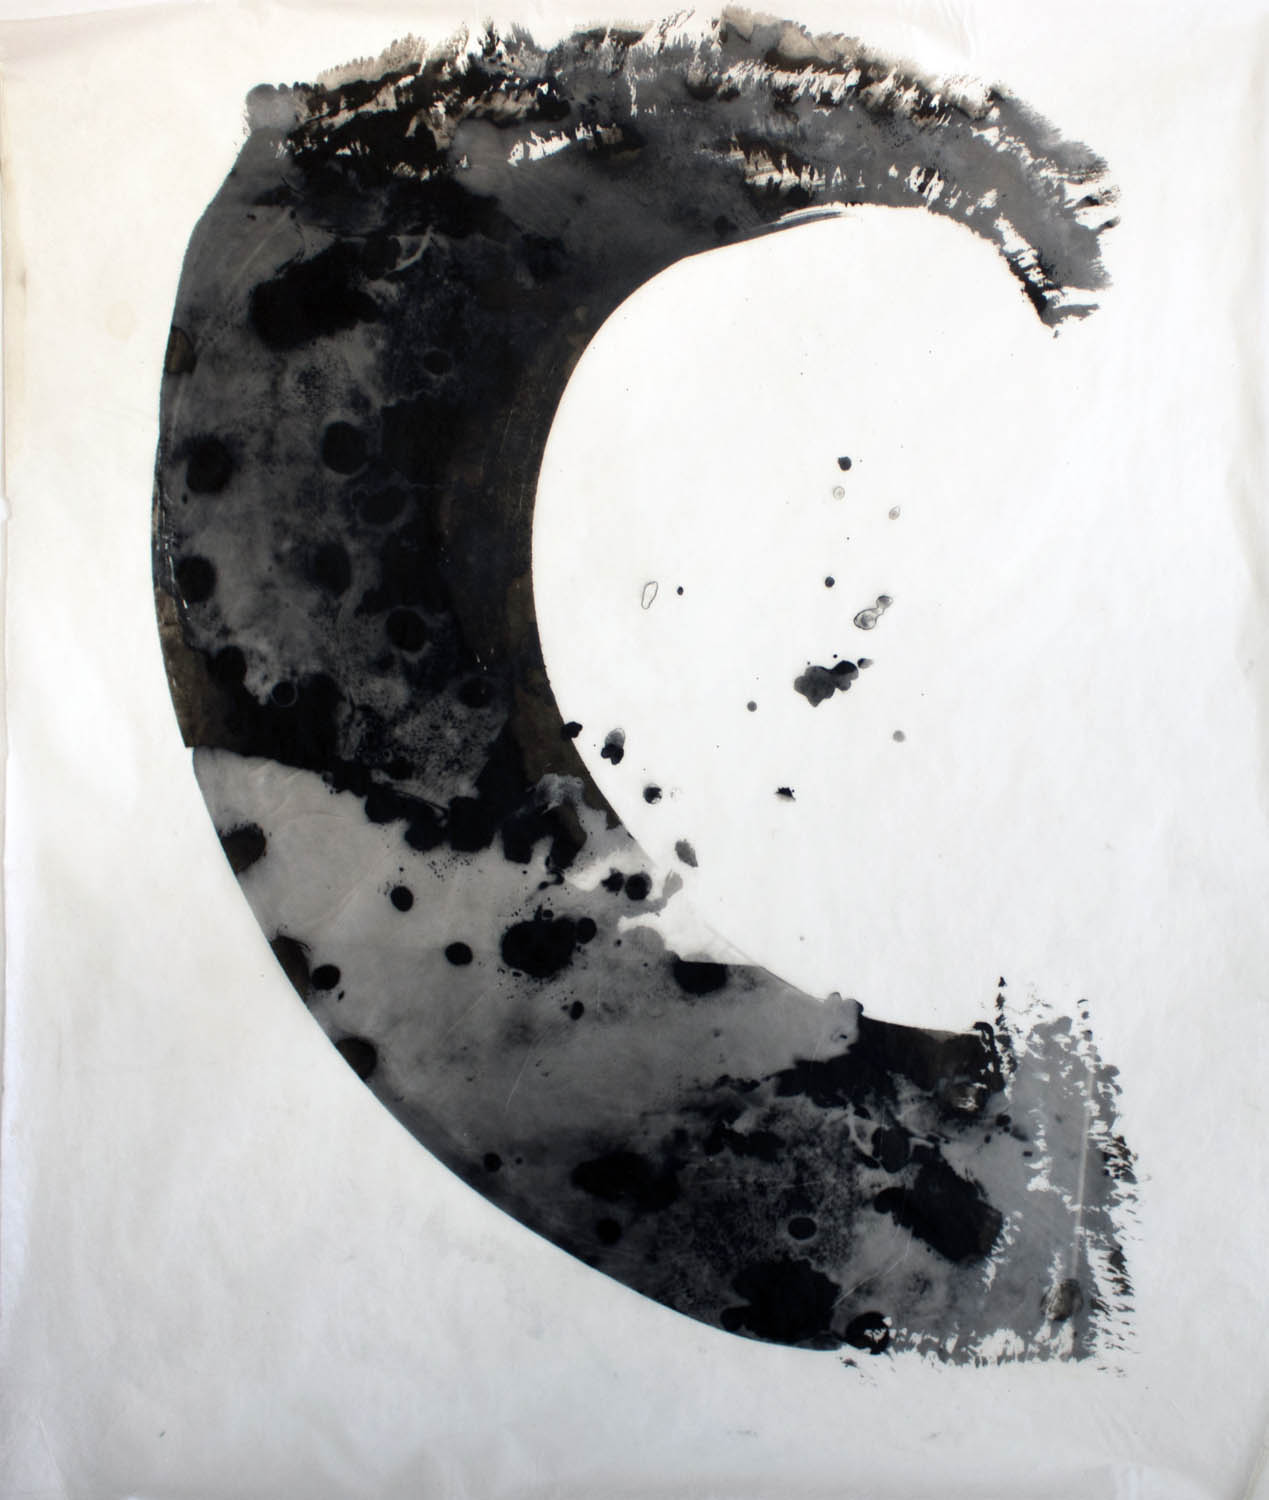 A wave shape, like the letter C, in this abstract work.